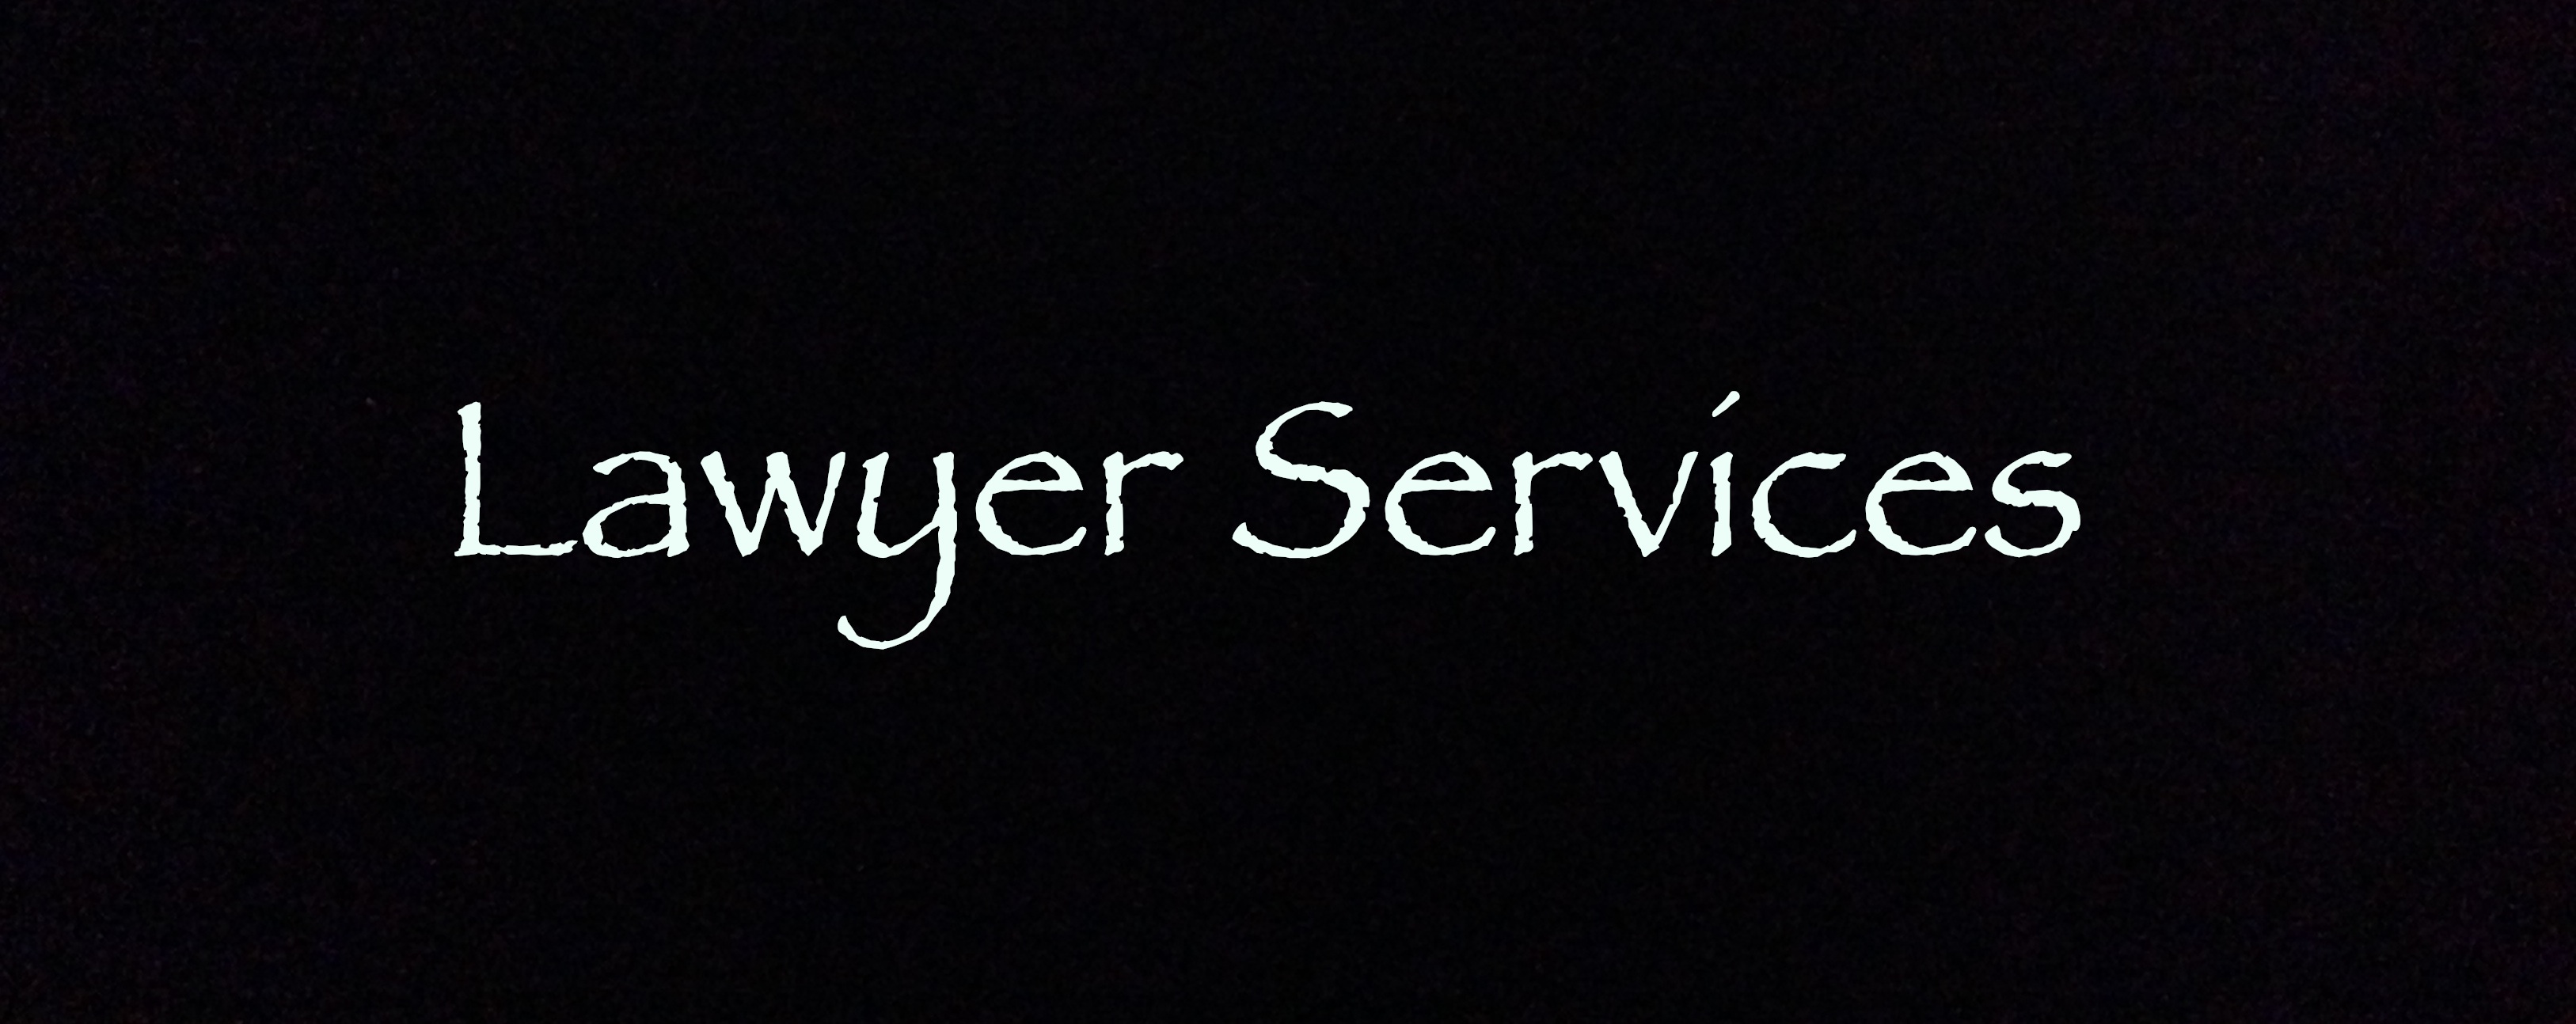 click to move to Legal Services page